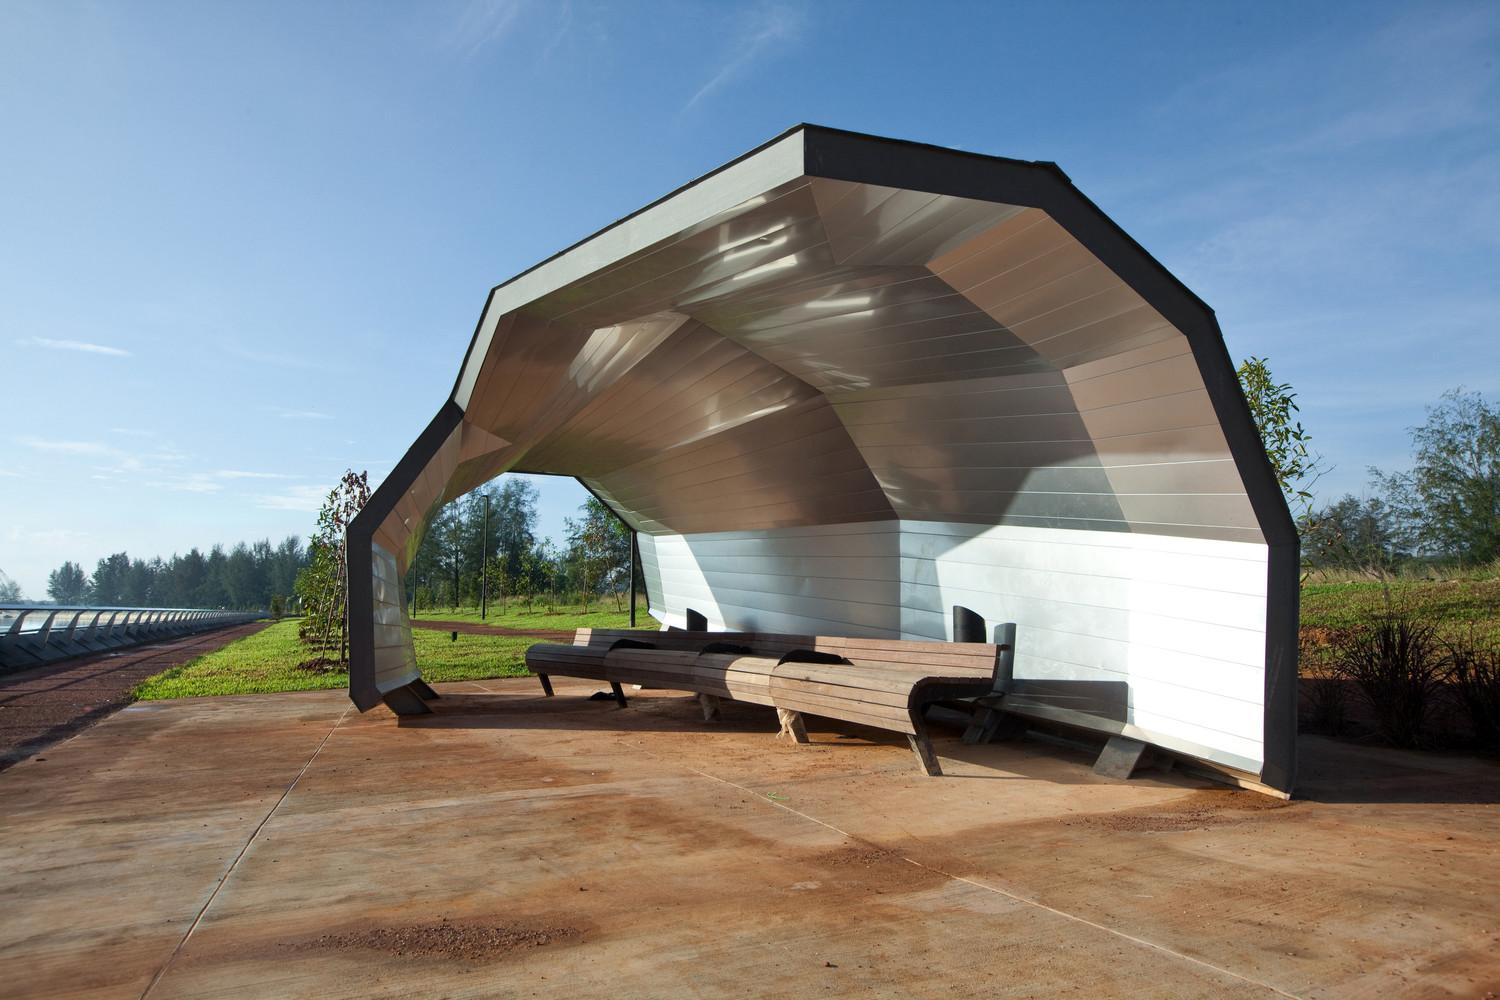 The rest shelter is shaped as a dynamic swirling form that draws inspiration from elements of the coastal context, emulating the rolling sea waves and the corkscrew shell